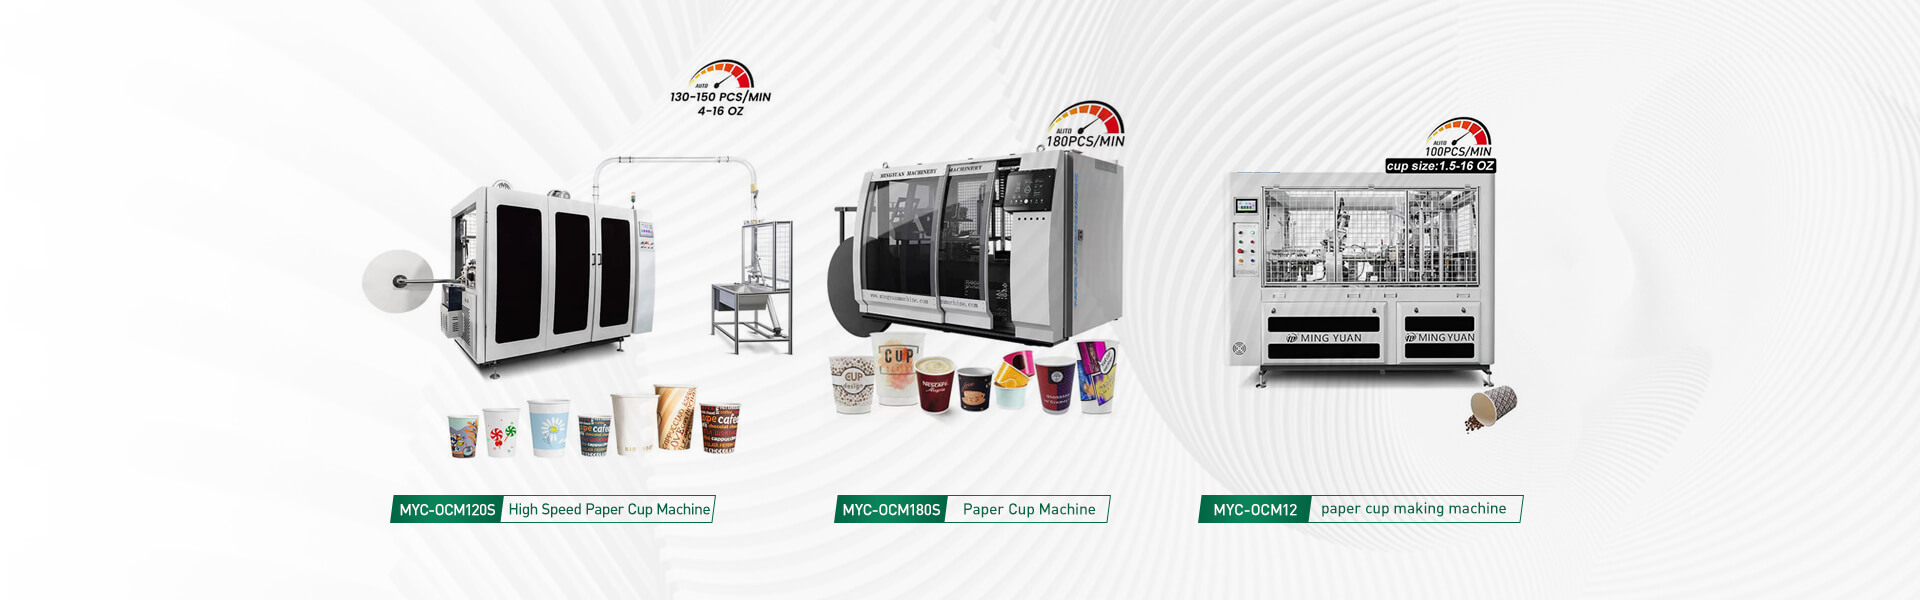 High Speed Intelligent Paper Cup Machine Main Features